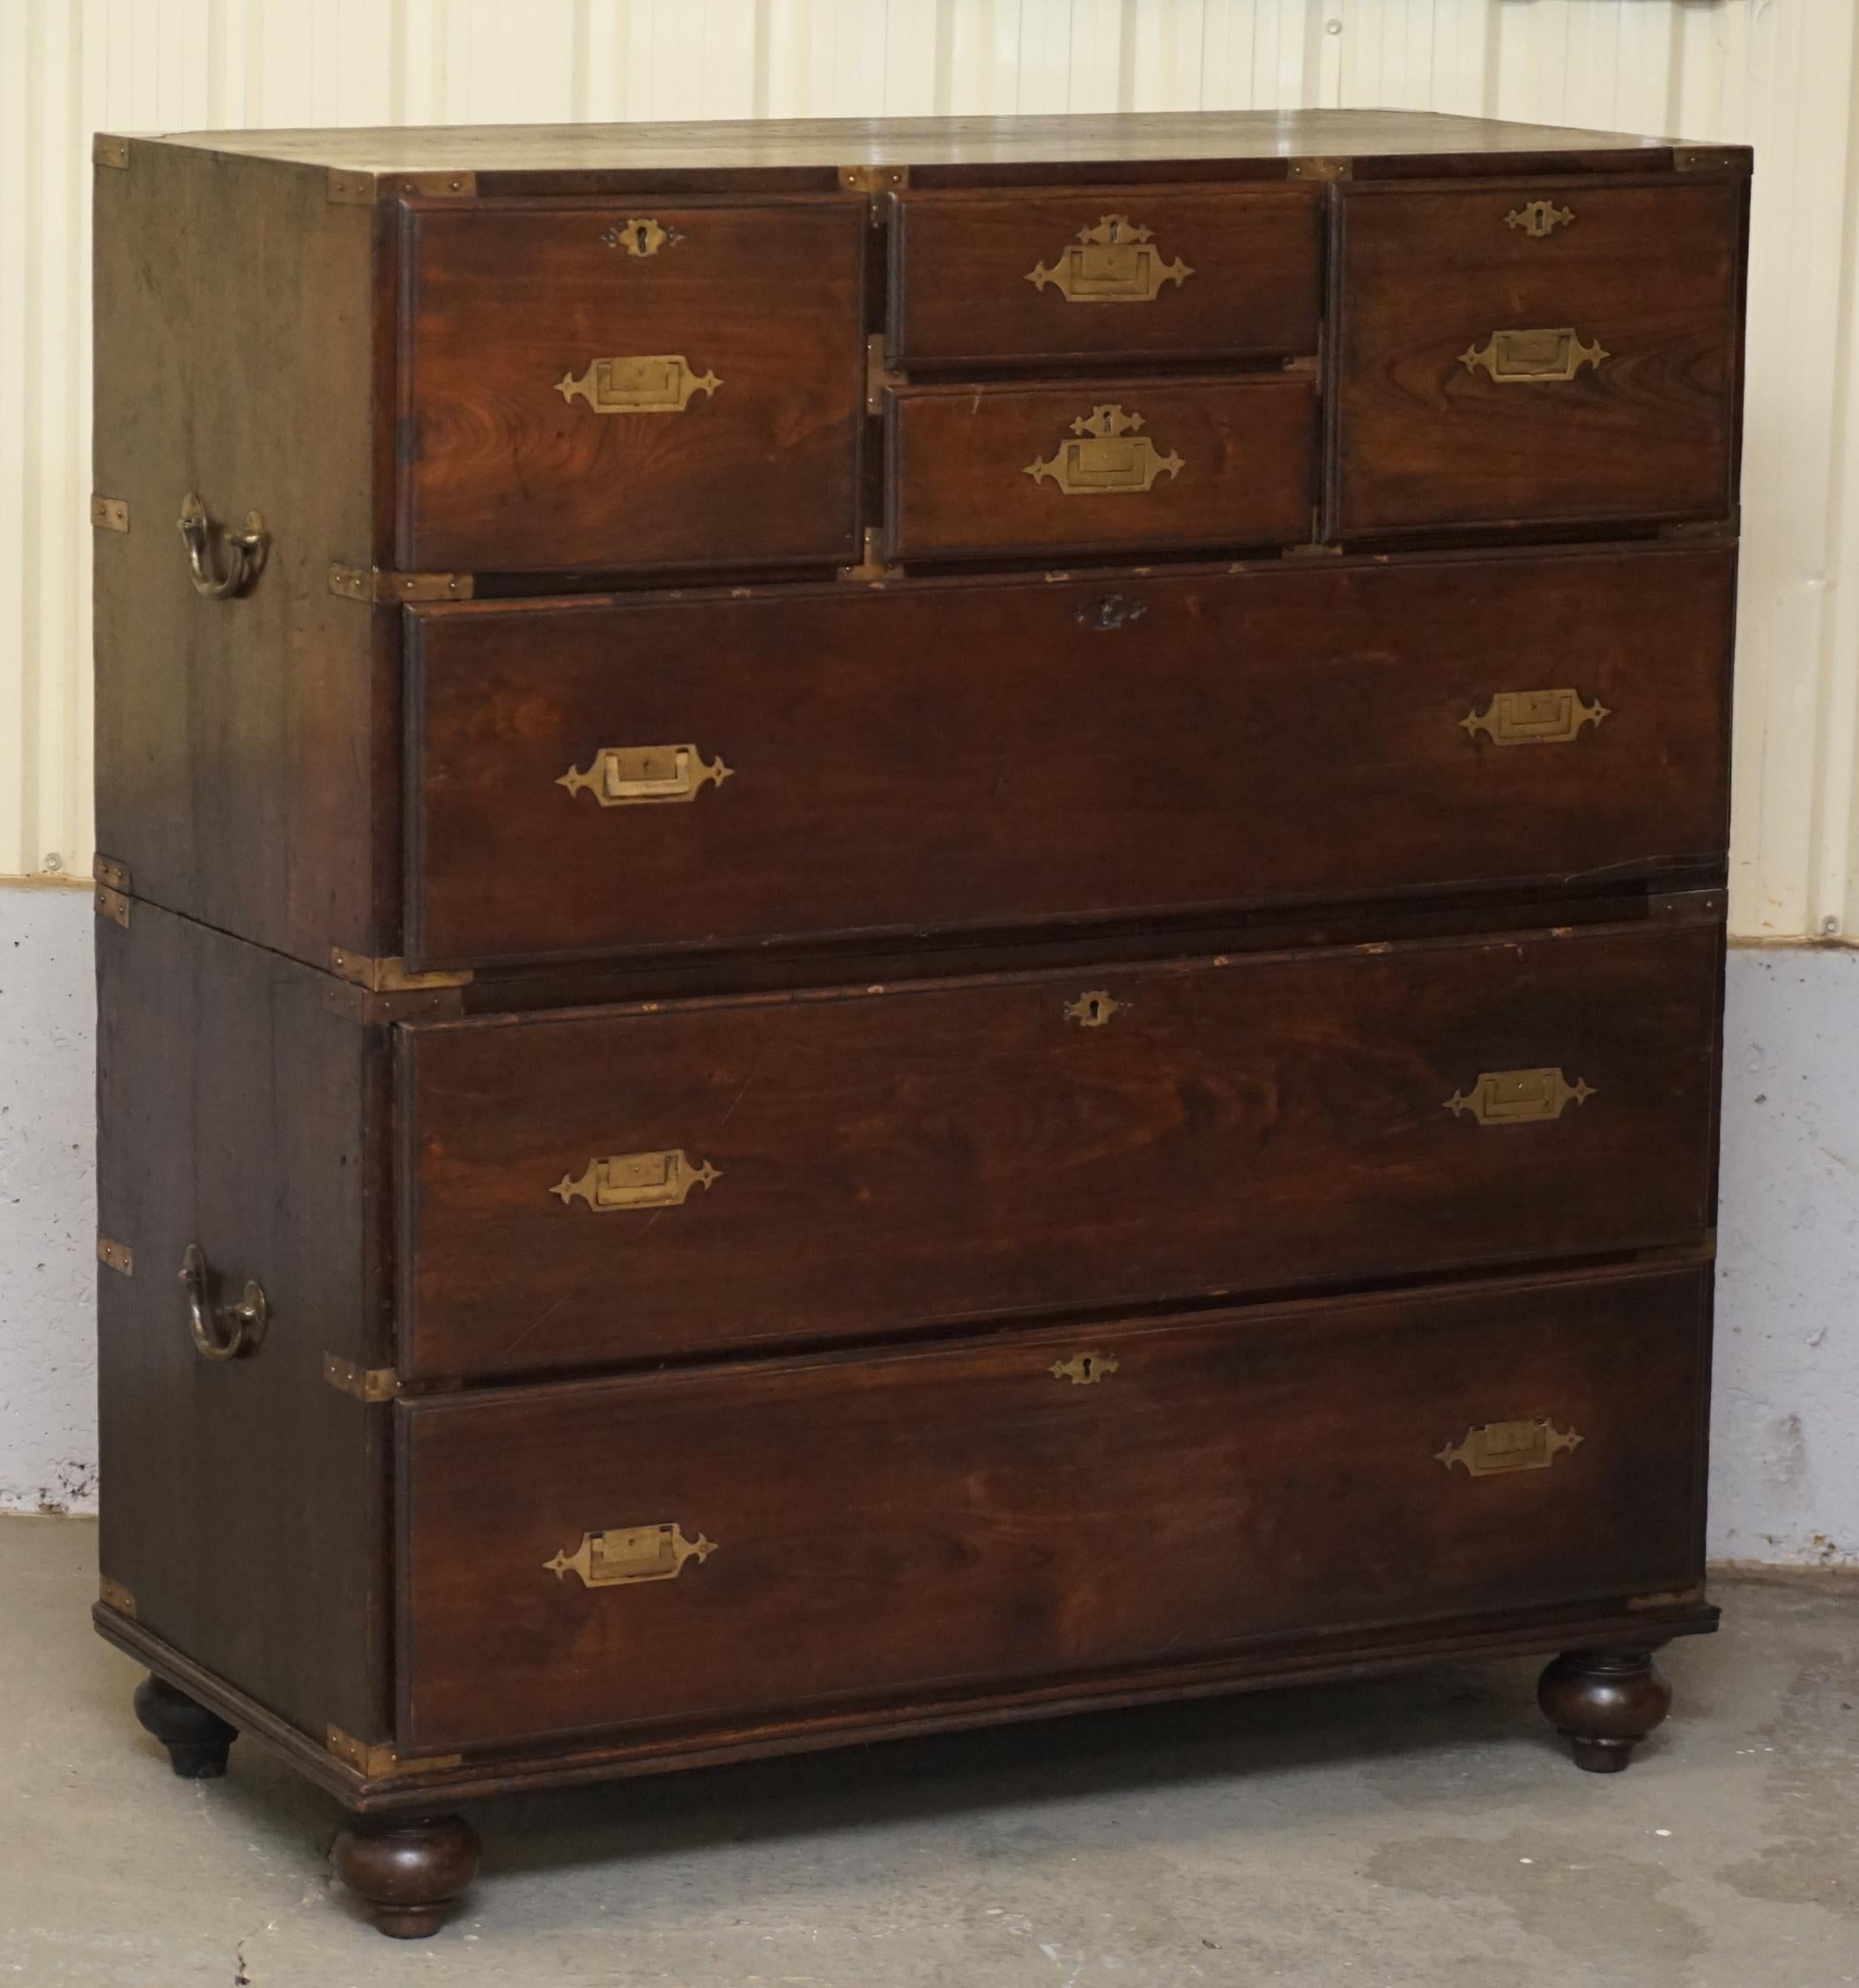 We are delighted to offer for sale this very rare, original camphor wood Anglo-Indian military campaign chest of drawers

A very rare and desirable piece of military used campaign furniture. These are highly collectable being the correct period